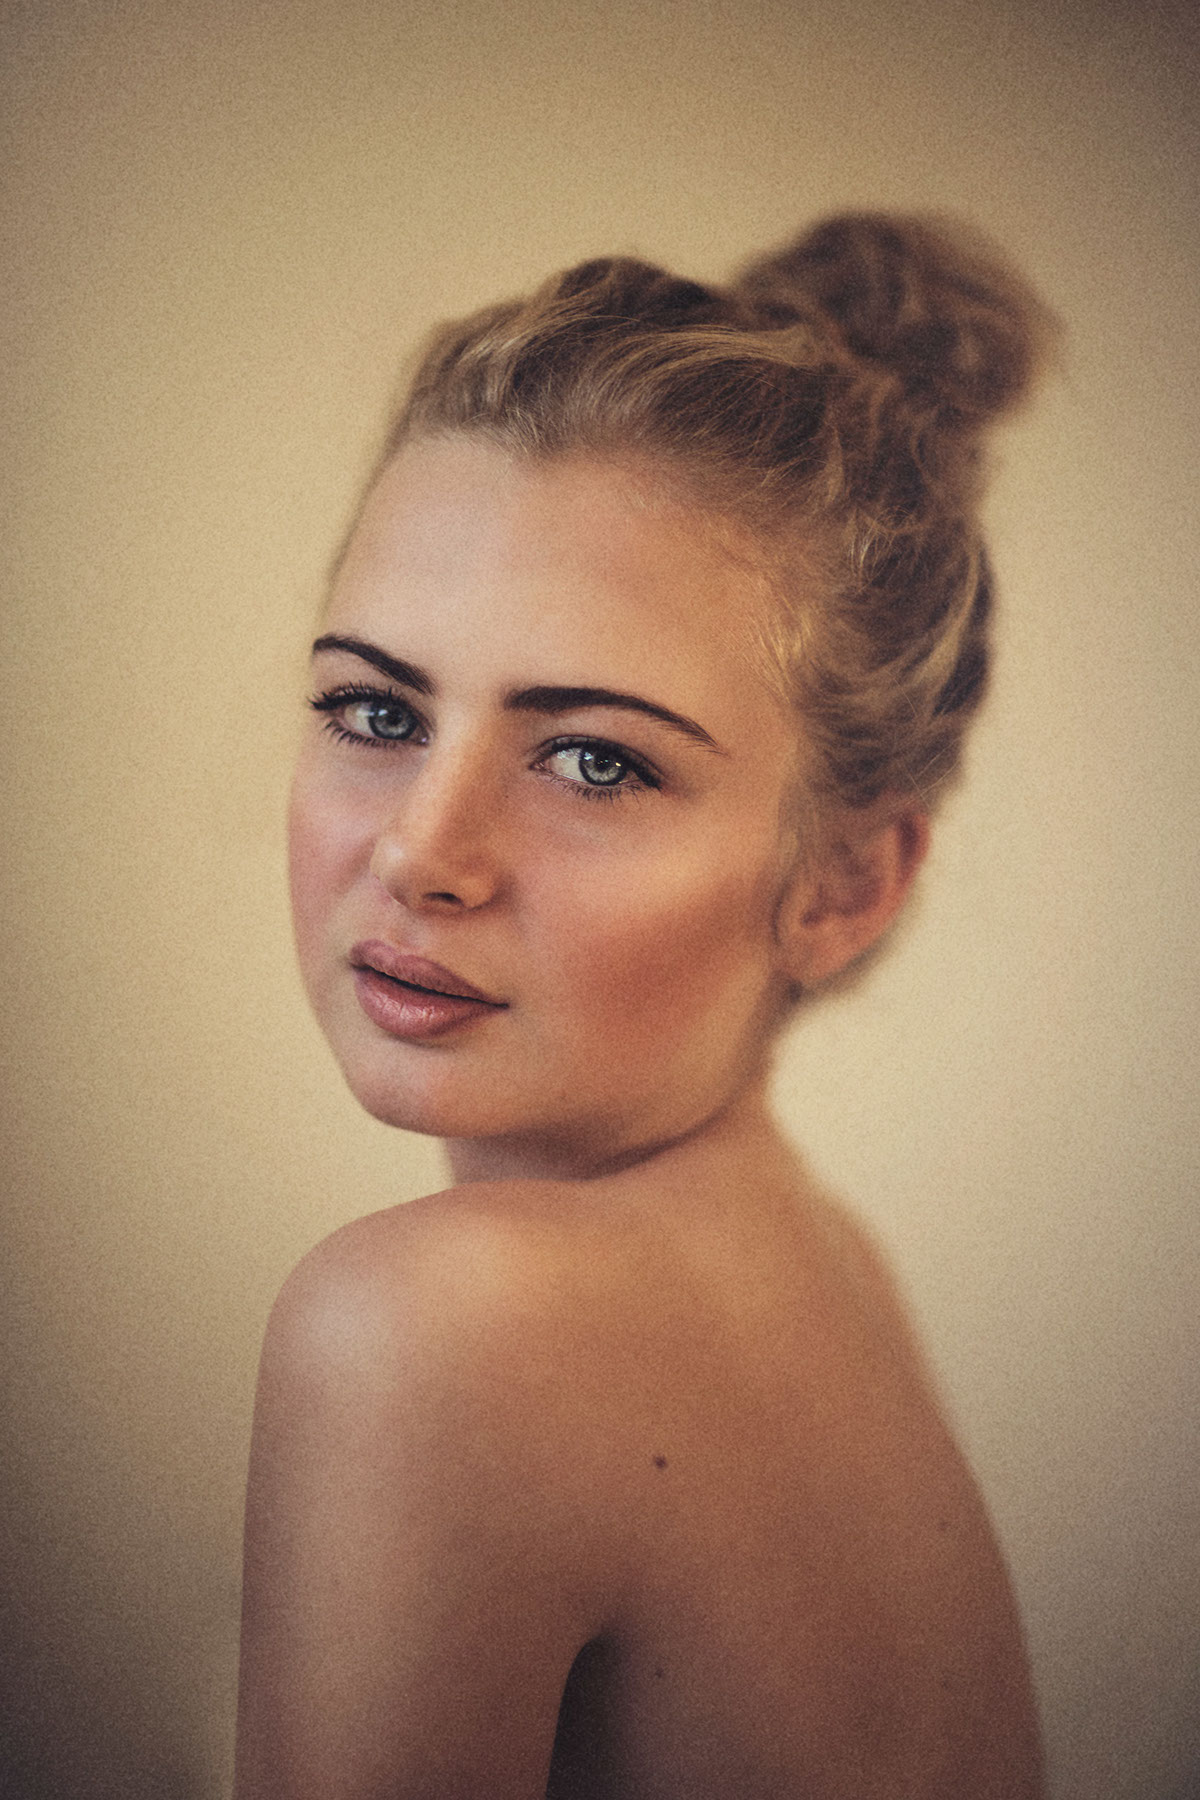 protrait PortraitPhotography girl natural Canon simple simplicity nicoletroost warm blonde blueeyes 85mm beauty nude